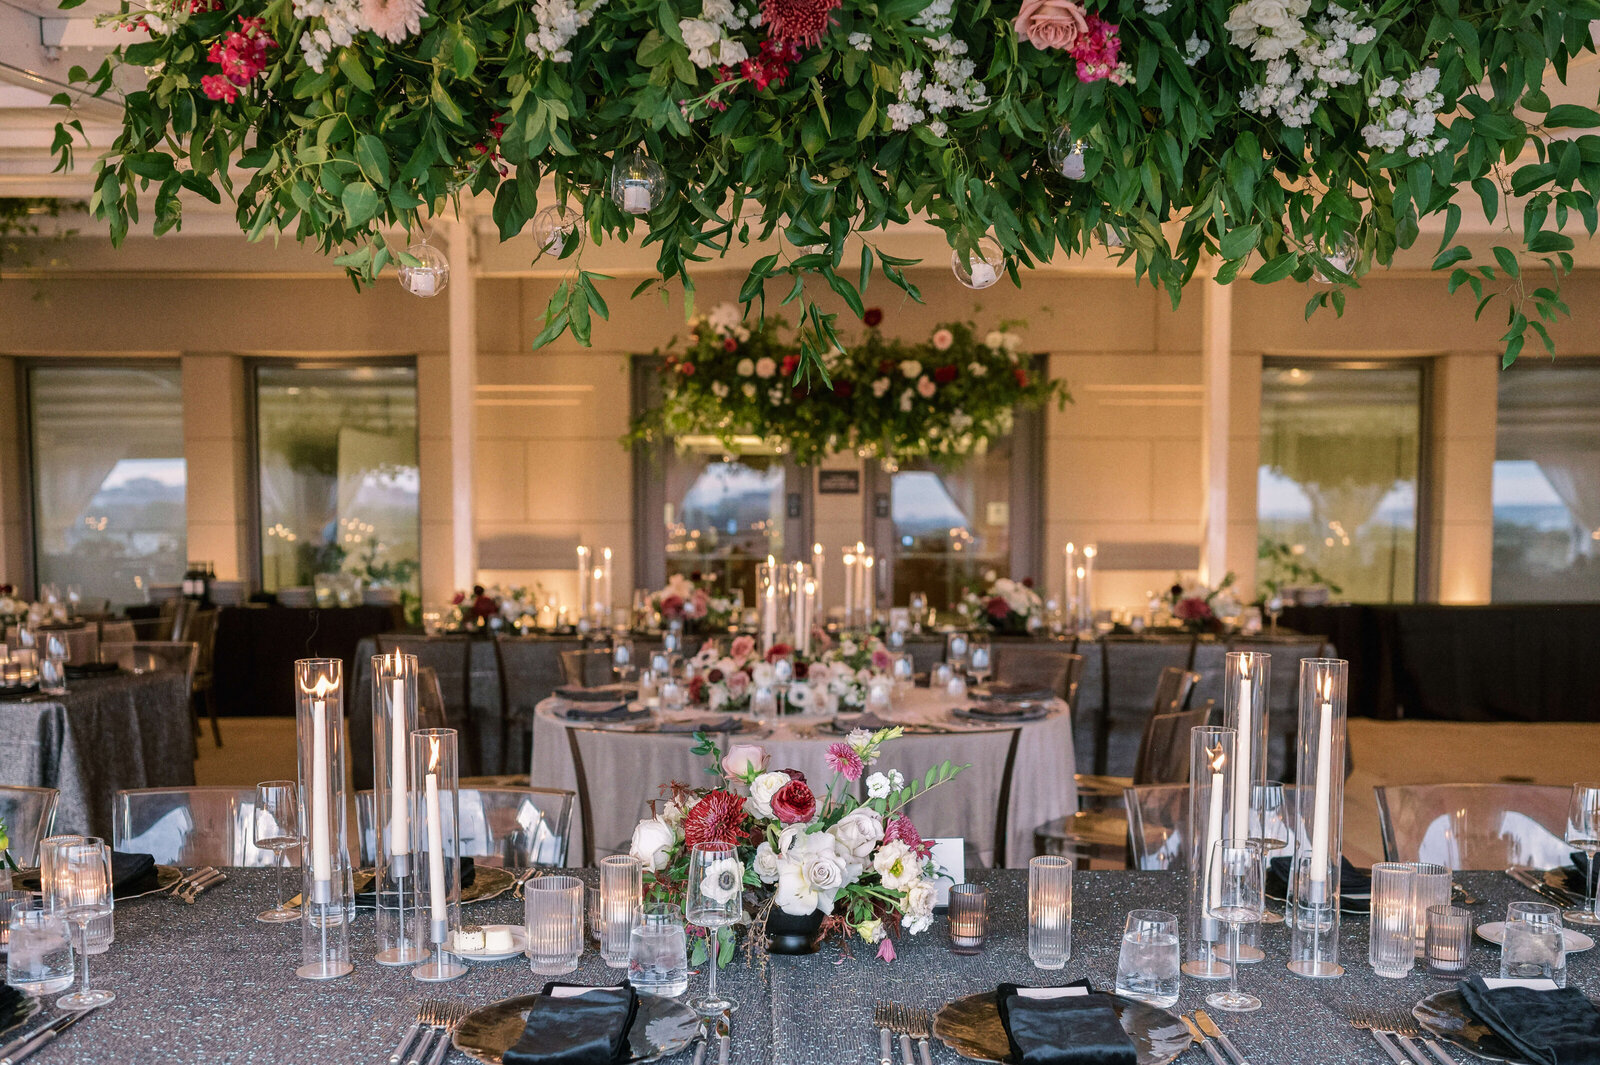 A Virginia Wedding features white and burgundy flowers on a silver table cloth with tall white candles